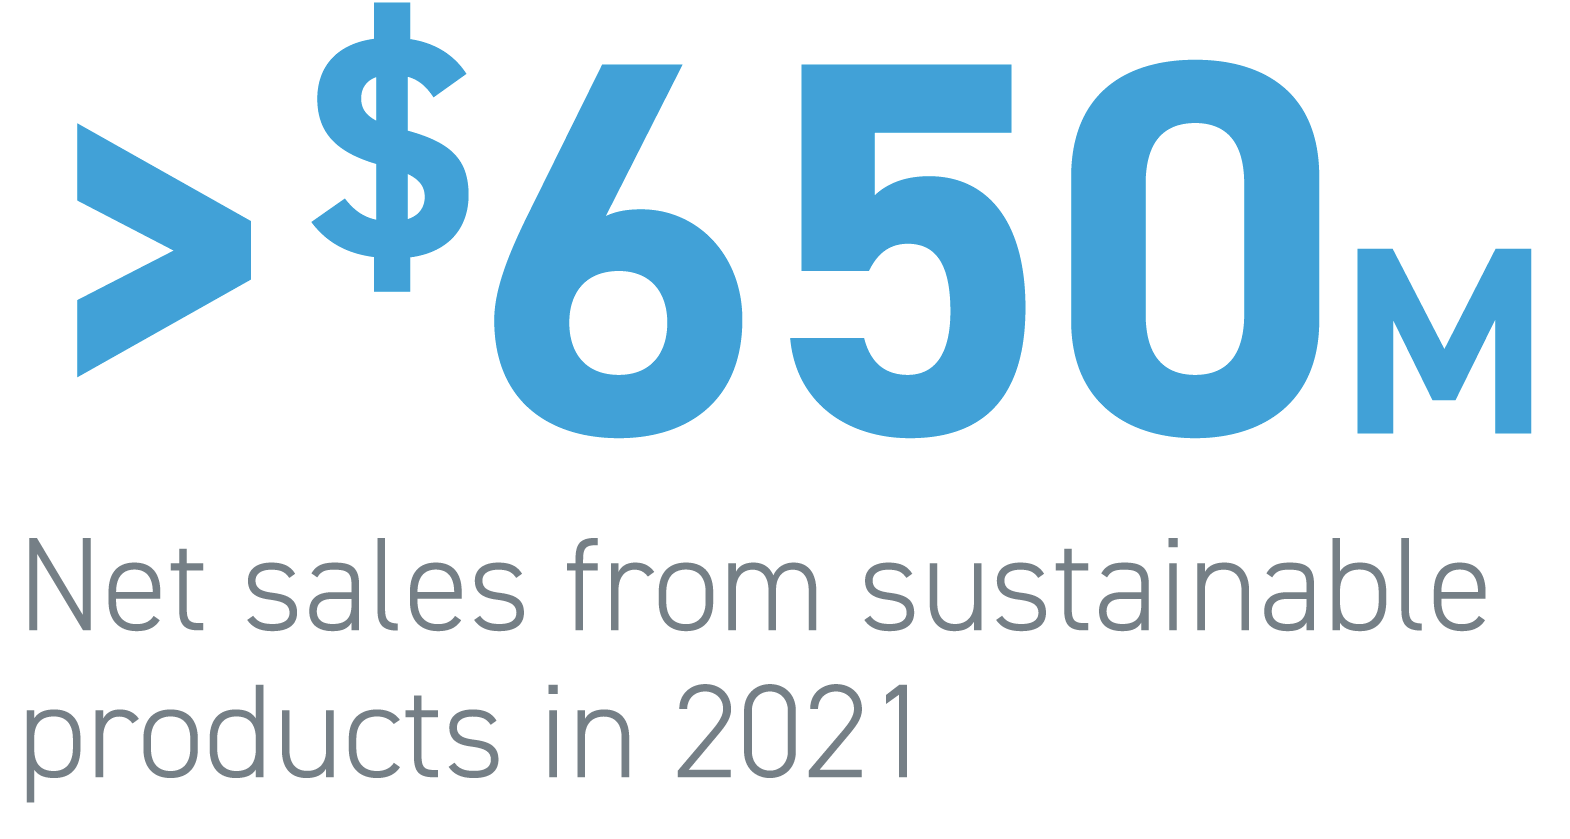 Greater than $650M in net sales from sustainable products in 2021